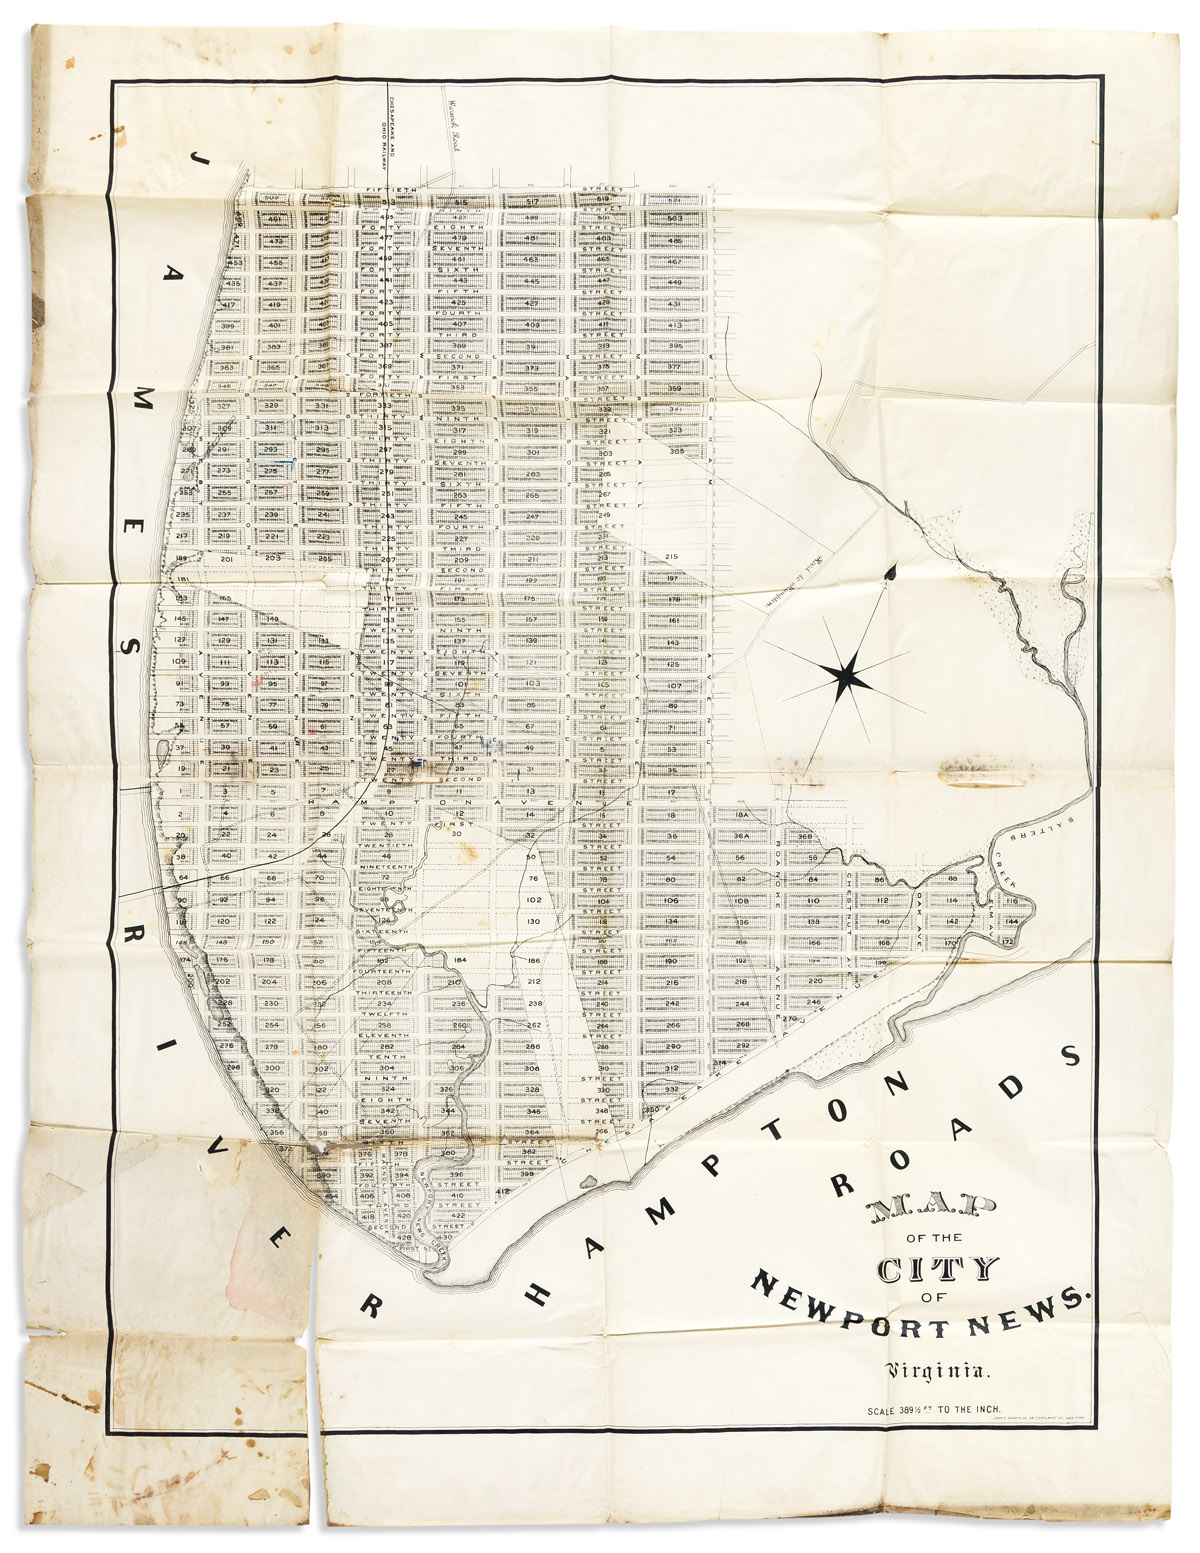 Map of the City of Newport News. Virginia.